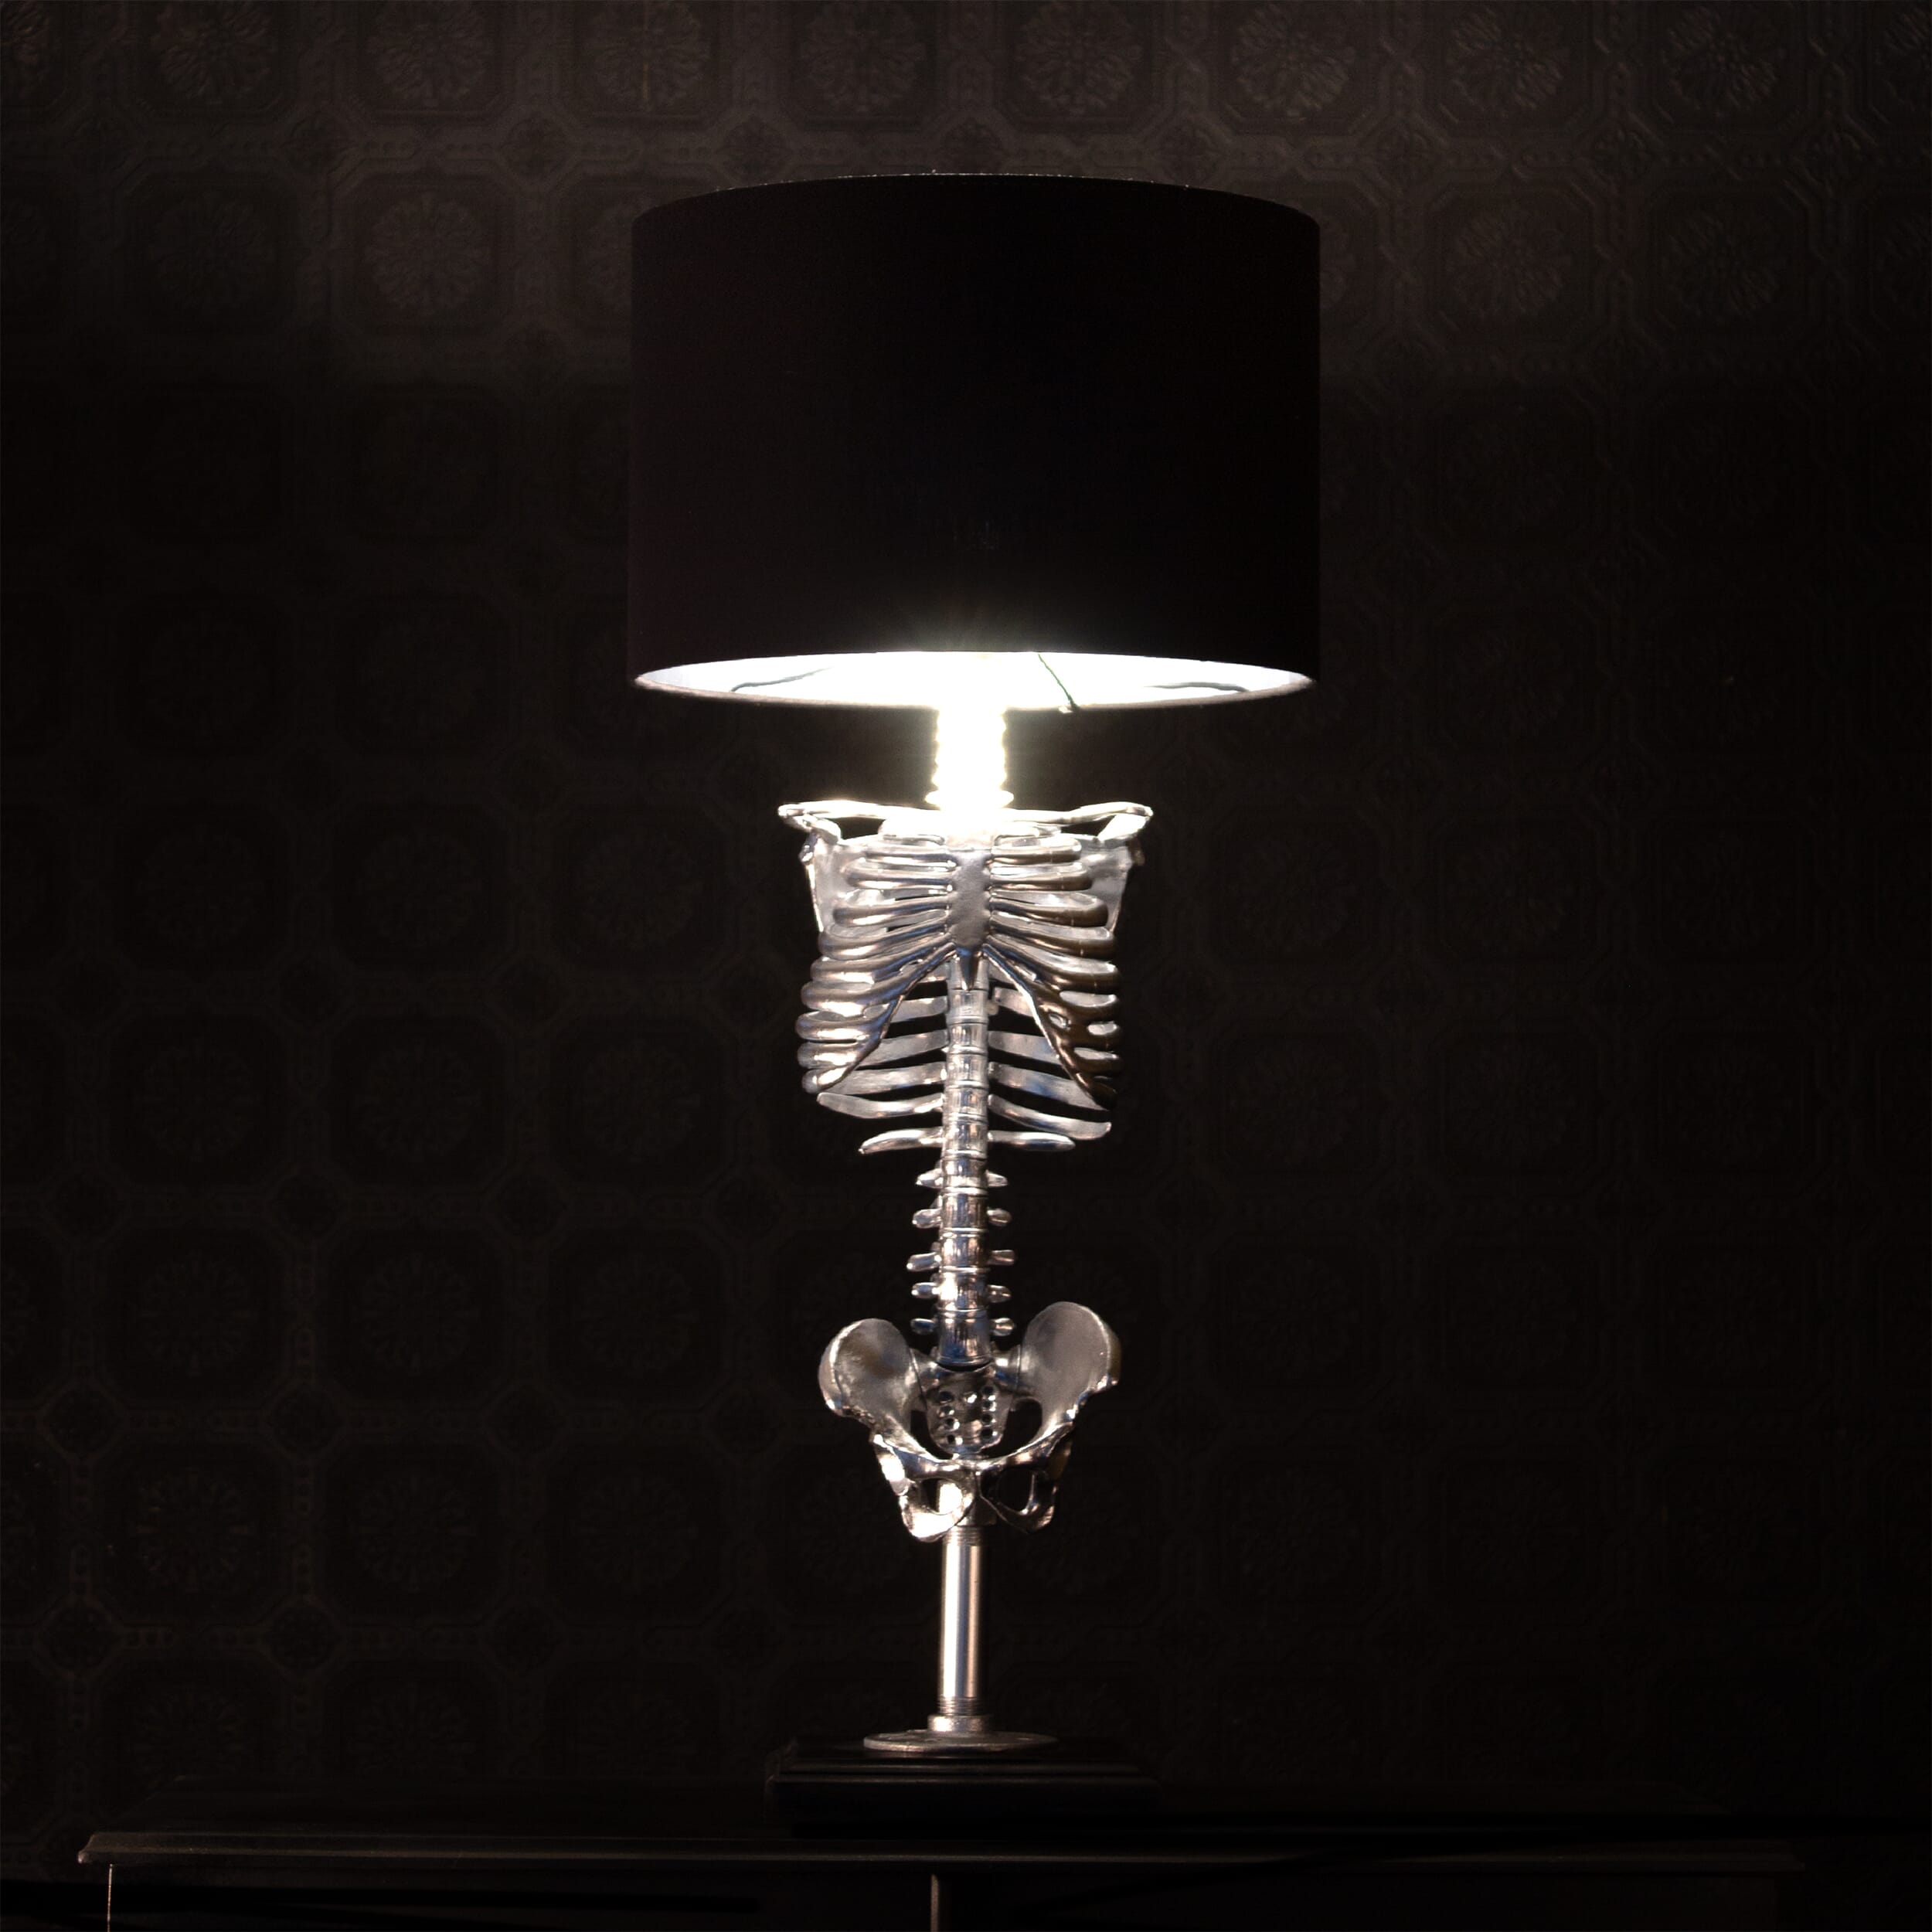 The Skeleton Table Lamp Silver Edition by The Blackened Teeth